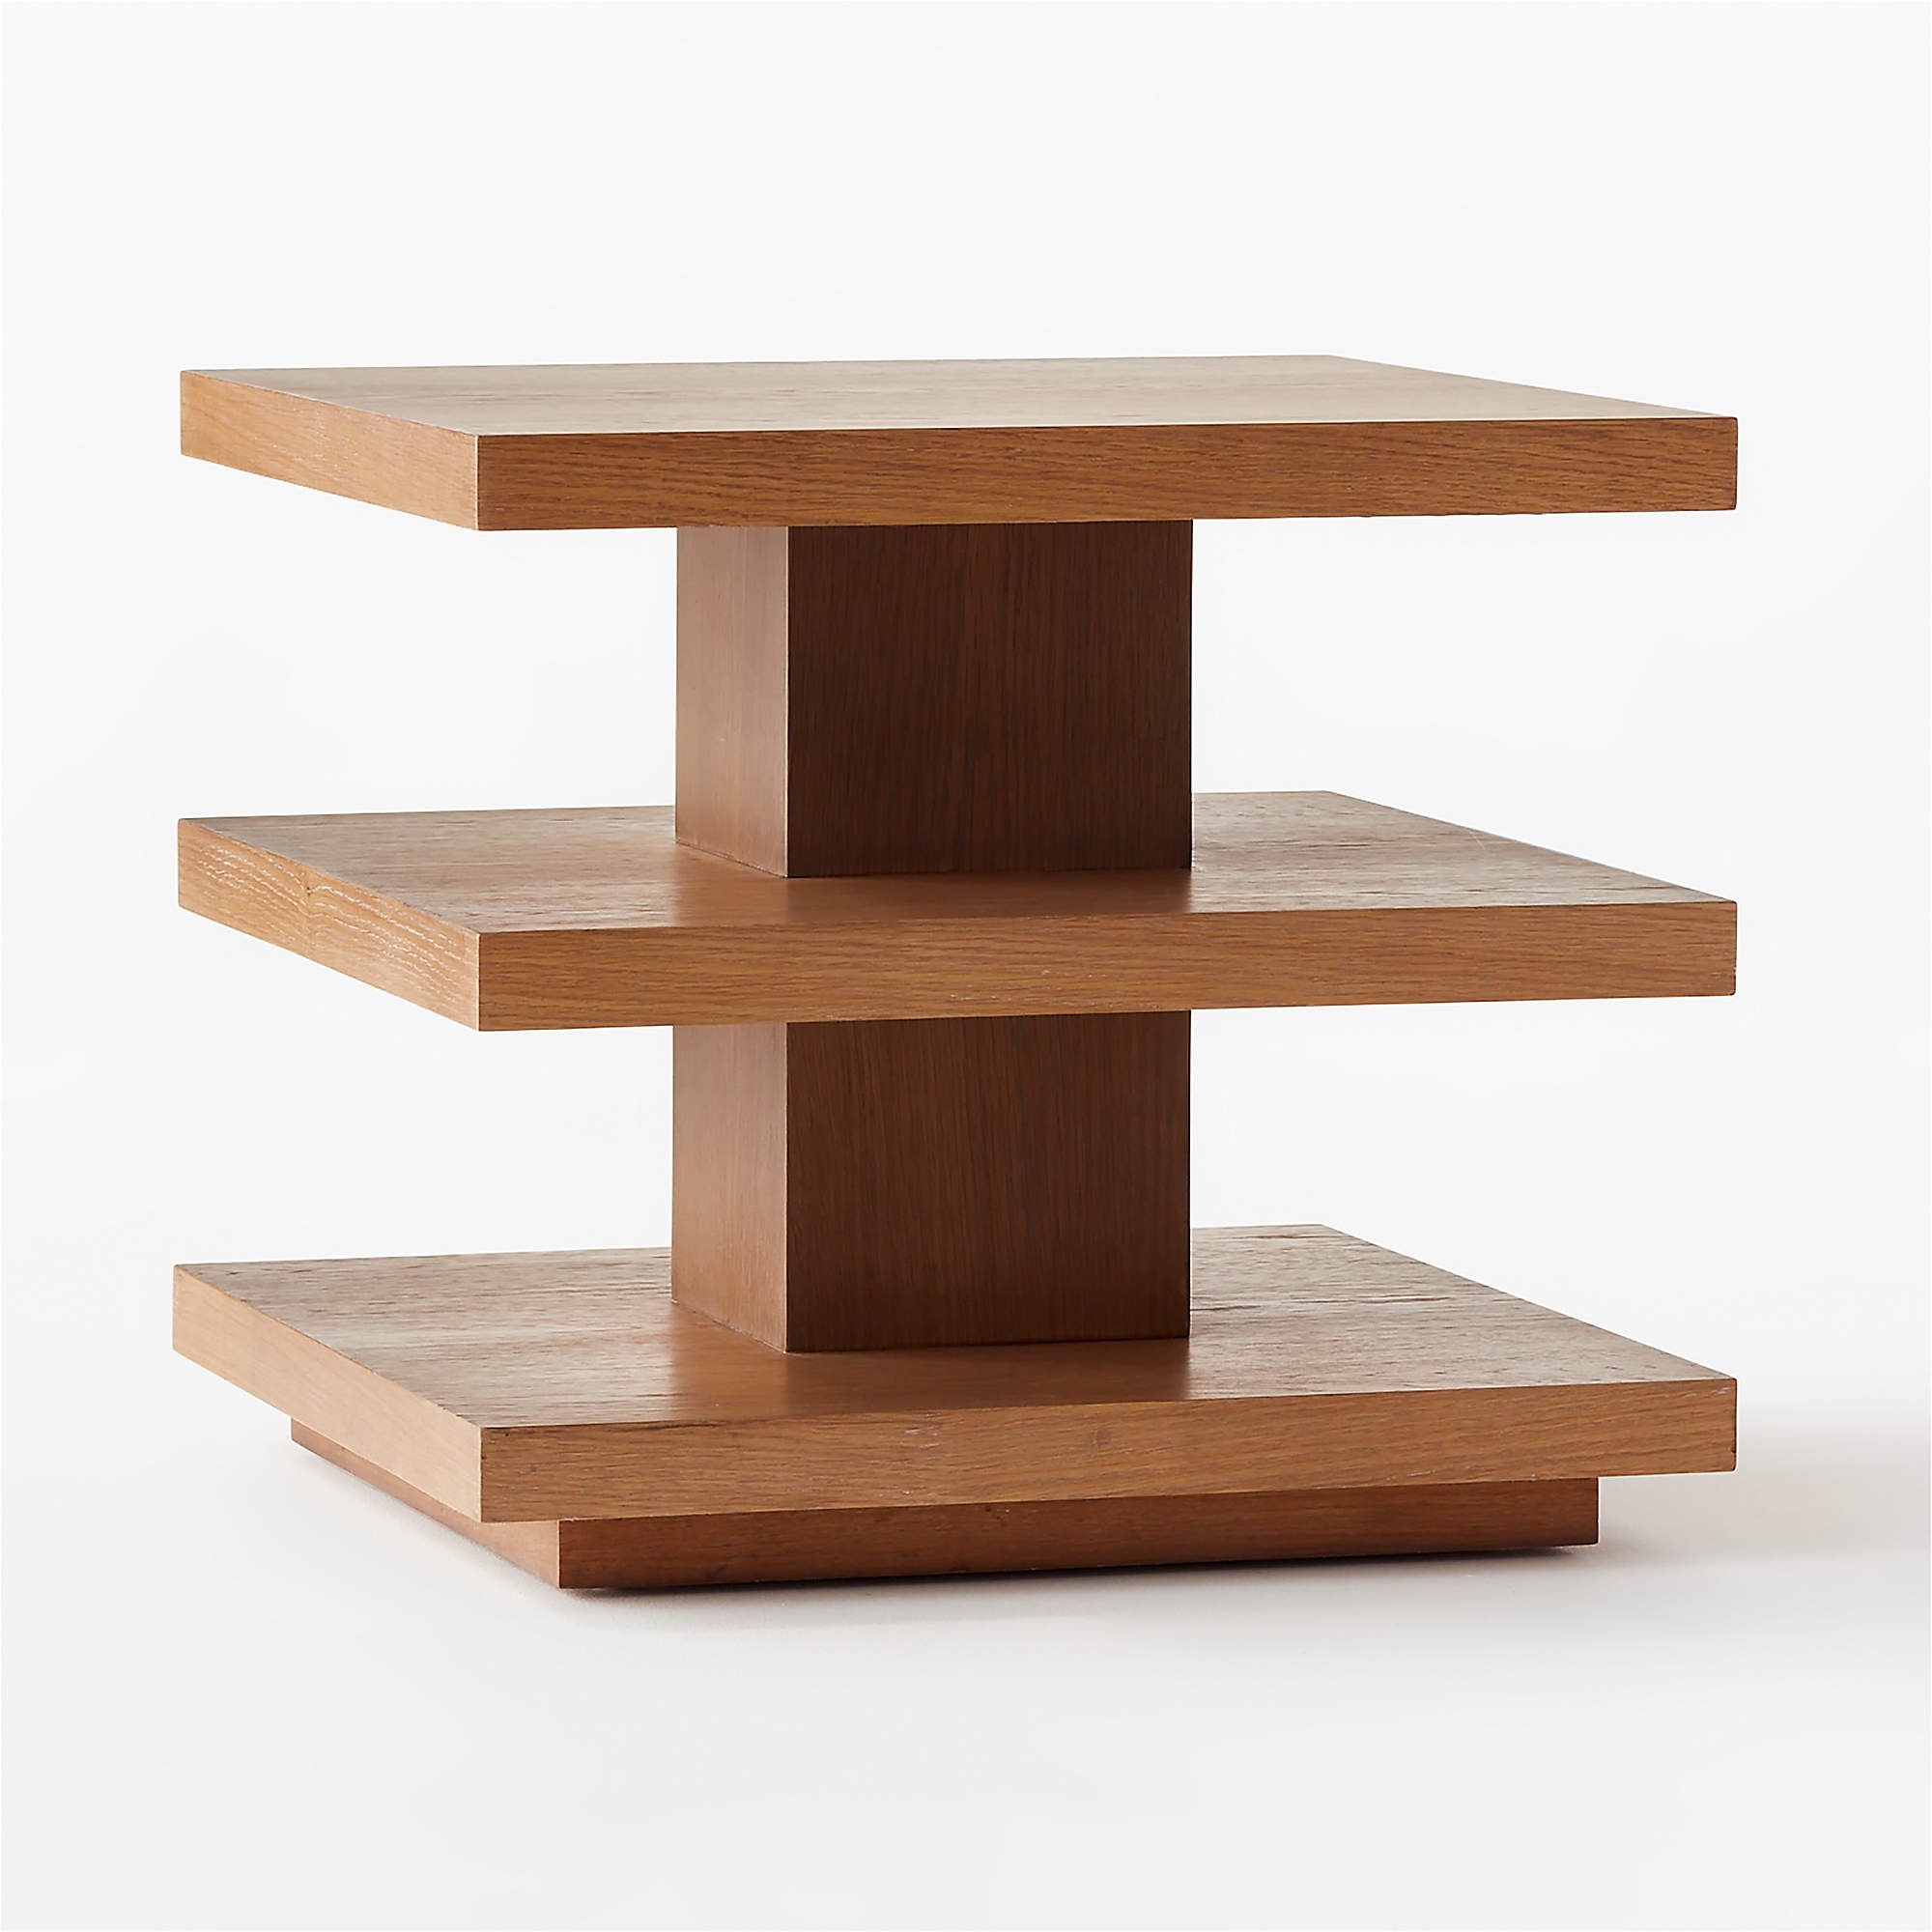 PILA WOOD TIERED SIDE TABLE - Image 1